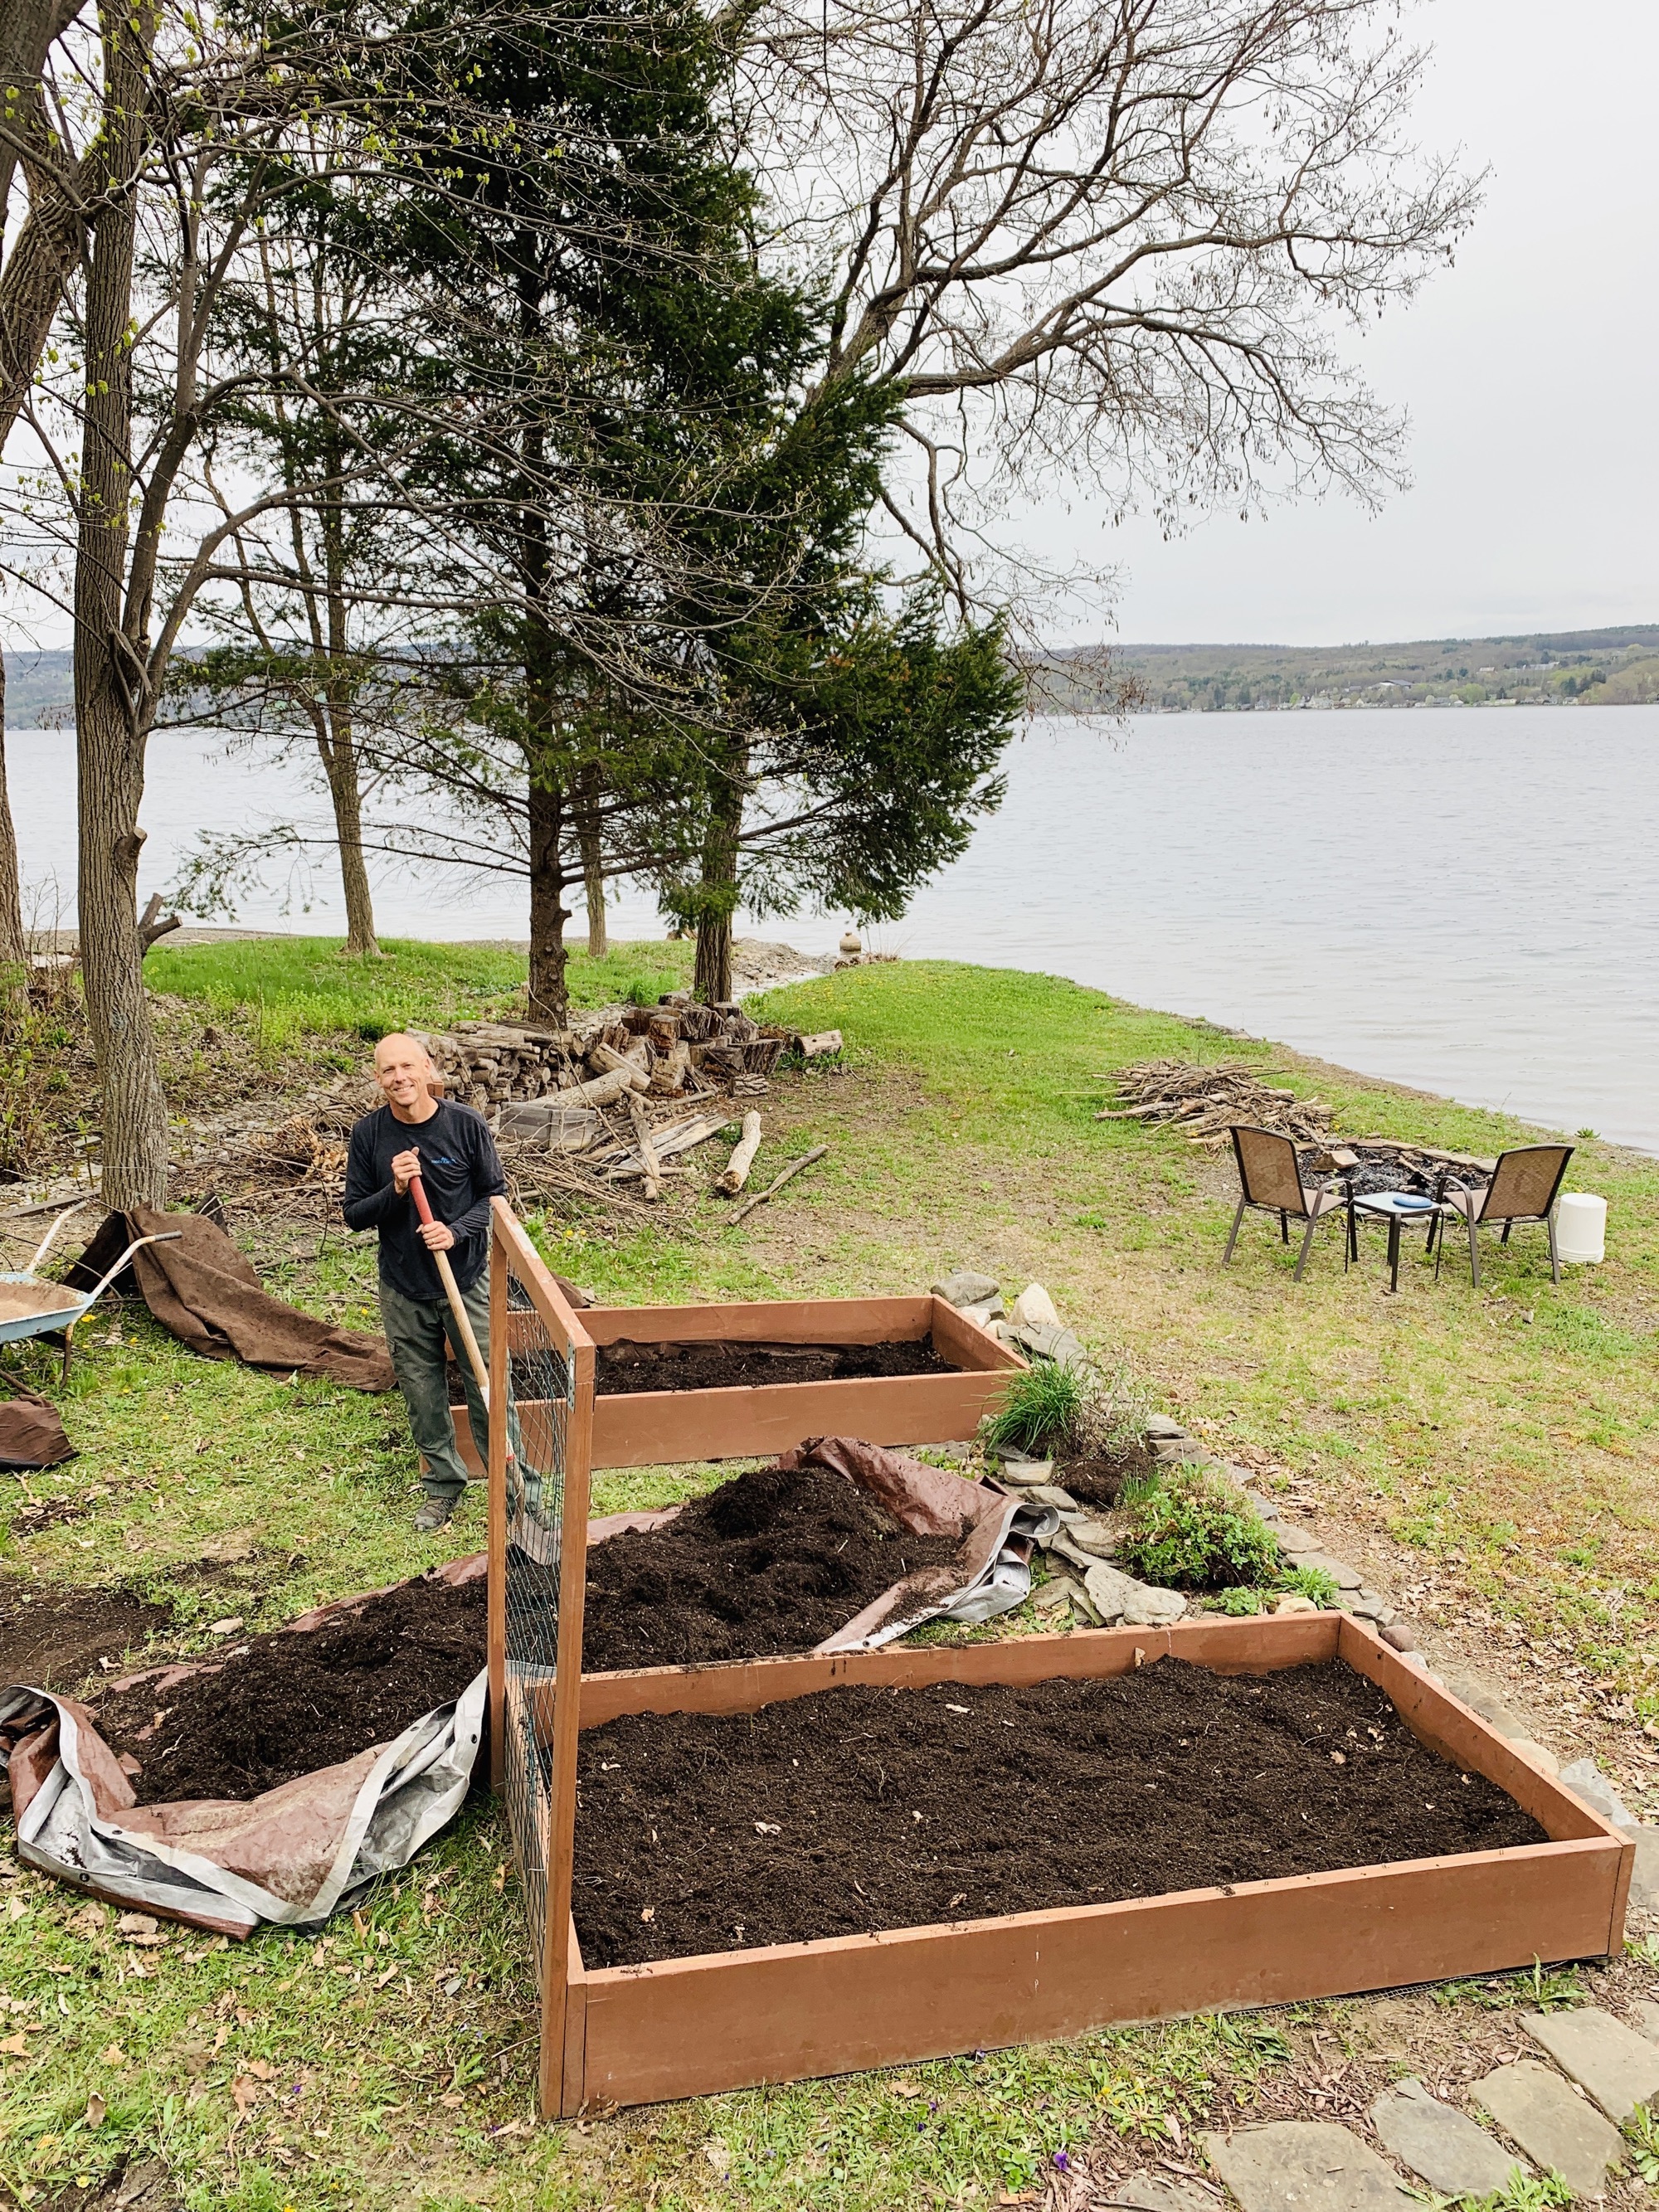 Me with the relocated garden beds